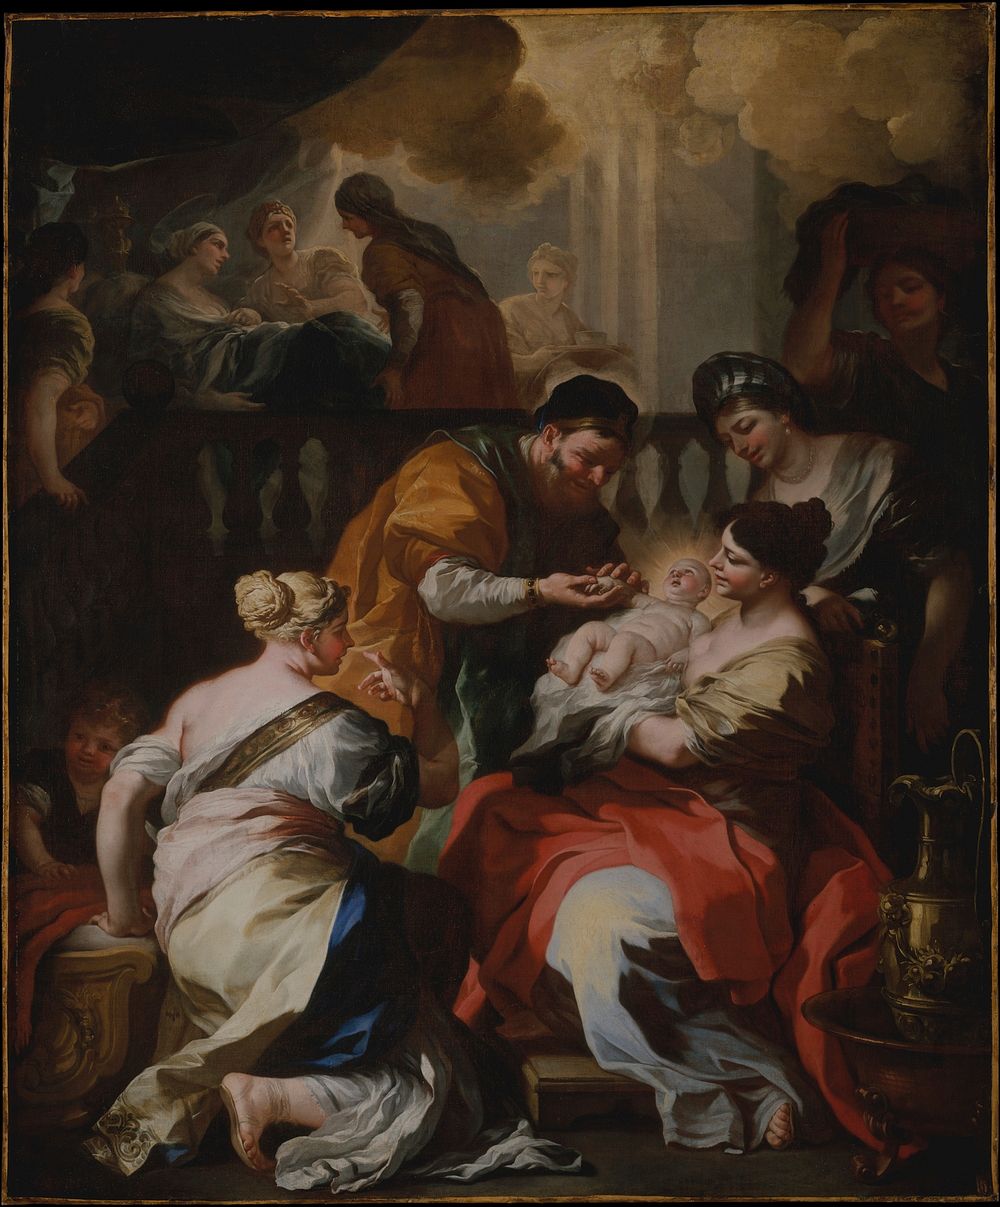 The Birth of the Virgin by Francesco Solimena